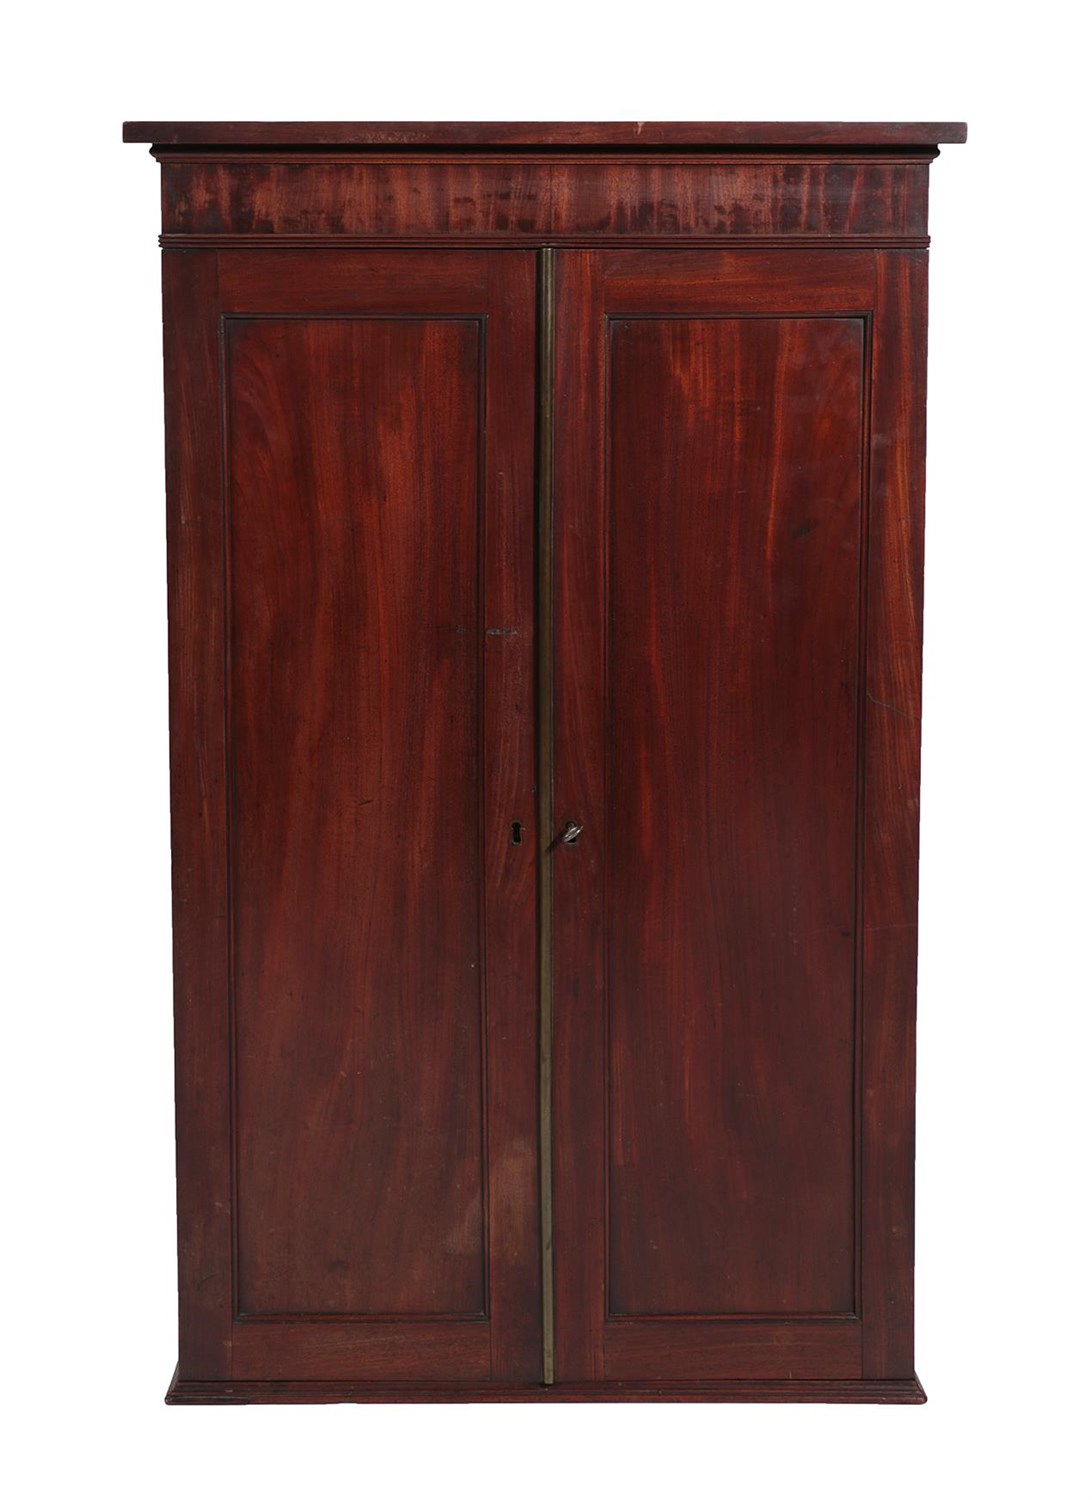 Lot 65 - A Mahogany Wall Cabinet, 2nd quarter 19th century, with two panel doors enclosing an arrangement of